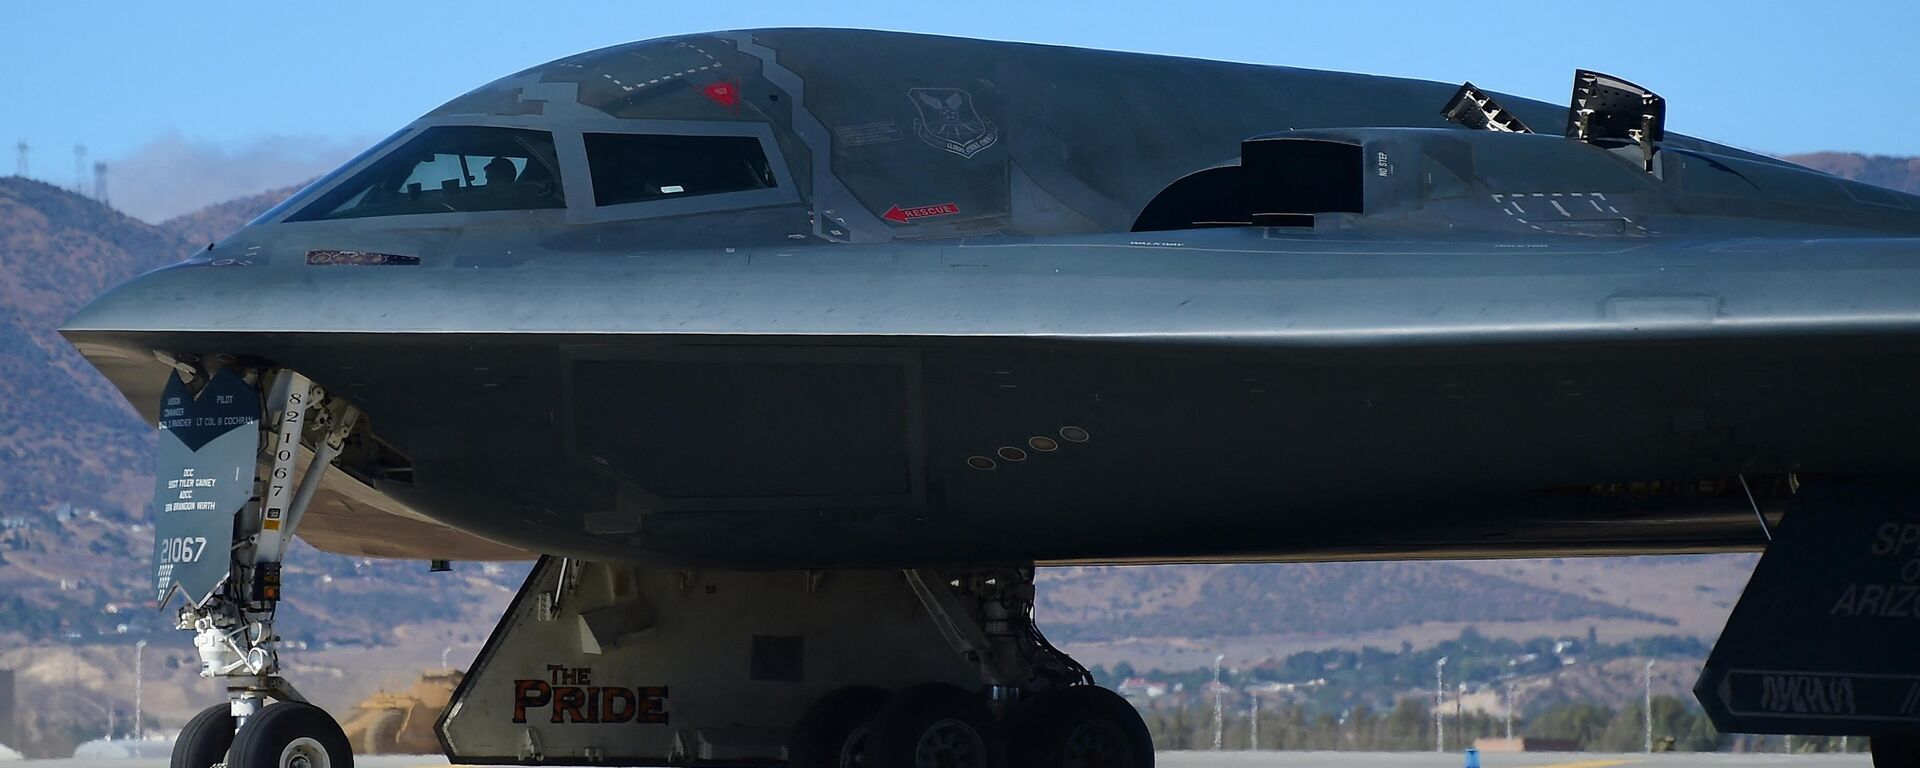 A B-2 Stealth Bomber lands at the Palmdale Aircraft Integration Center of Excellence in Palmdale, California on July 17, 2014 - Sputnik International, 1920, 29.10.2022